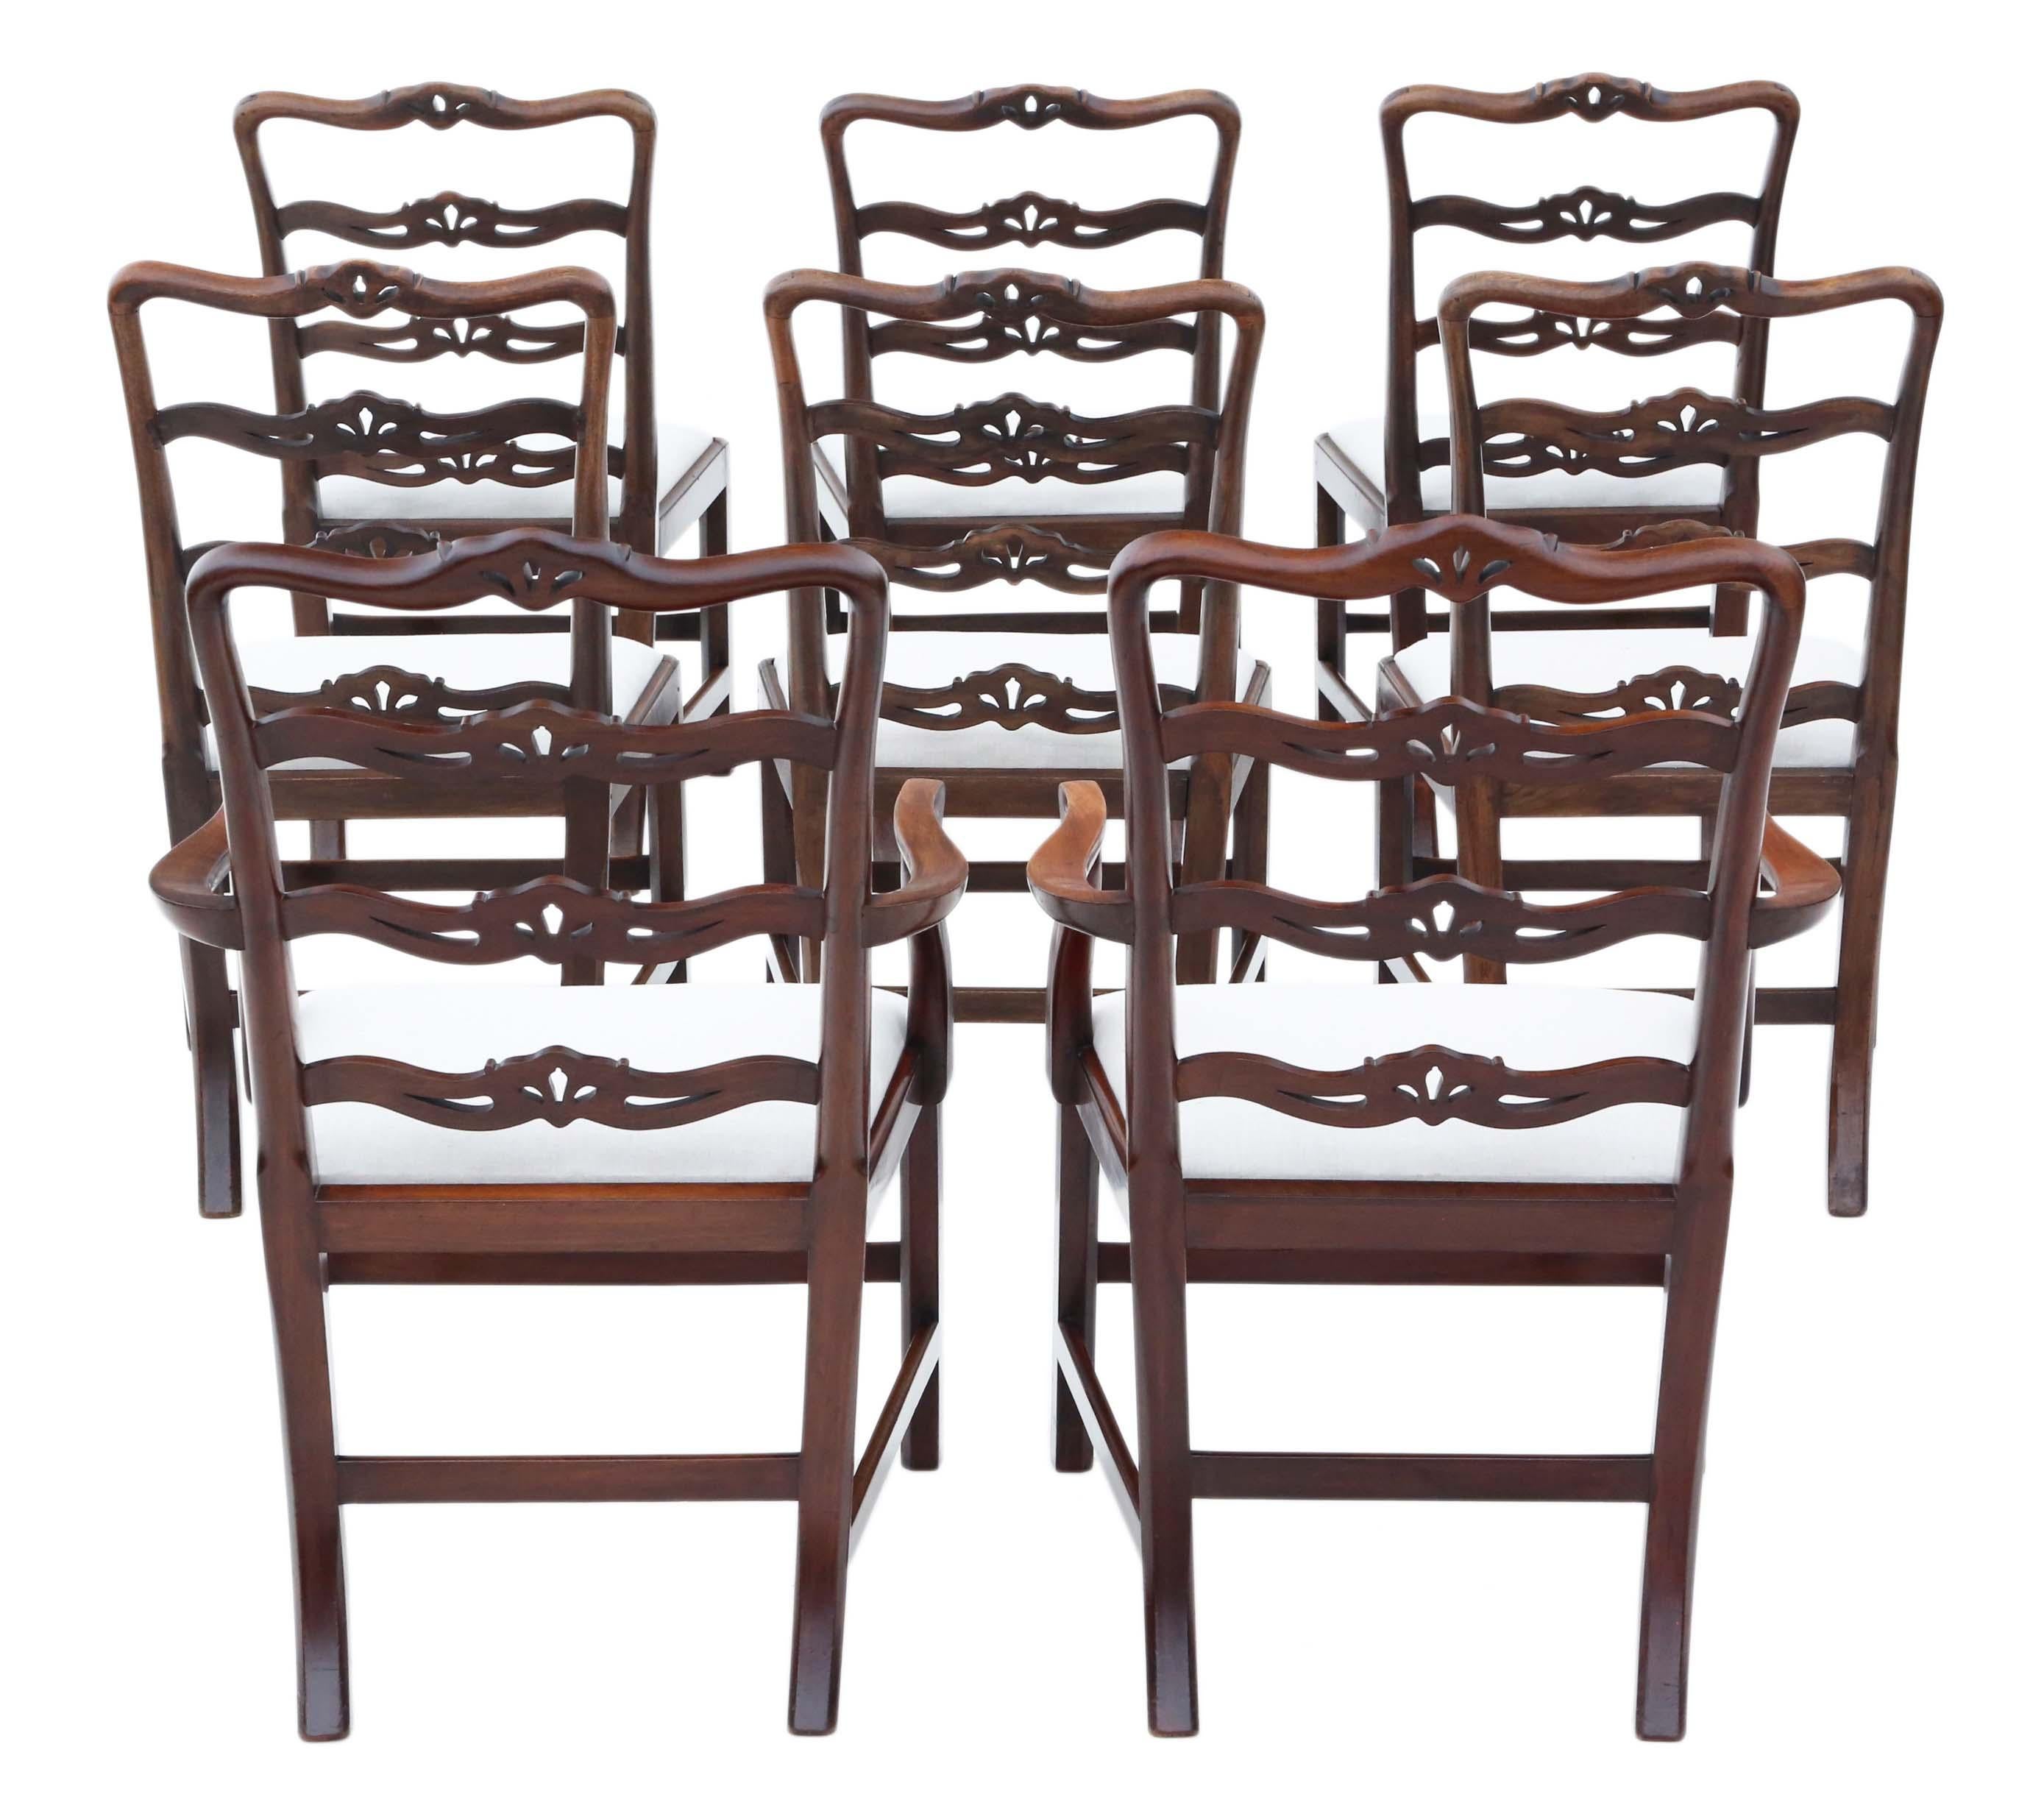 Antique quality set of 8 (6 + 2) mahogany dining chairs 19th Century ribbon back.

No loose joints. Lovely elegant design.

New professional upholstery.

Overall maximum dimensions:

Chair 57cmW x 54cmD x 99cmH (48cmH seat when sat